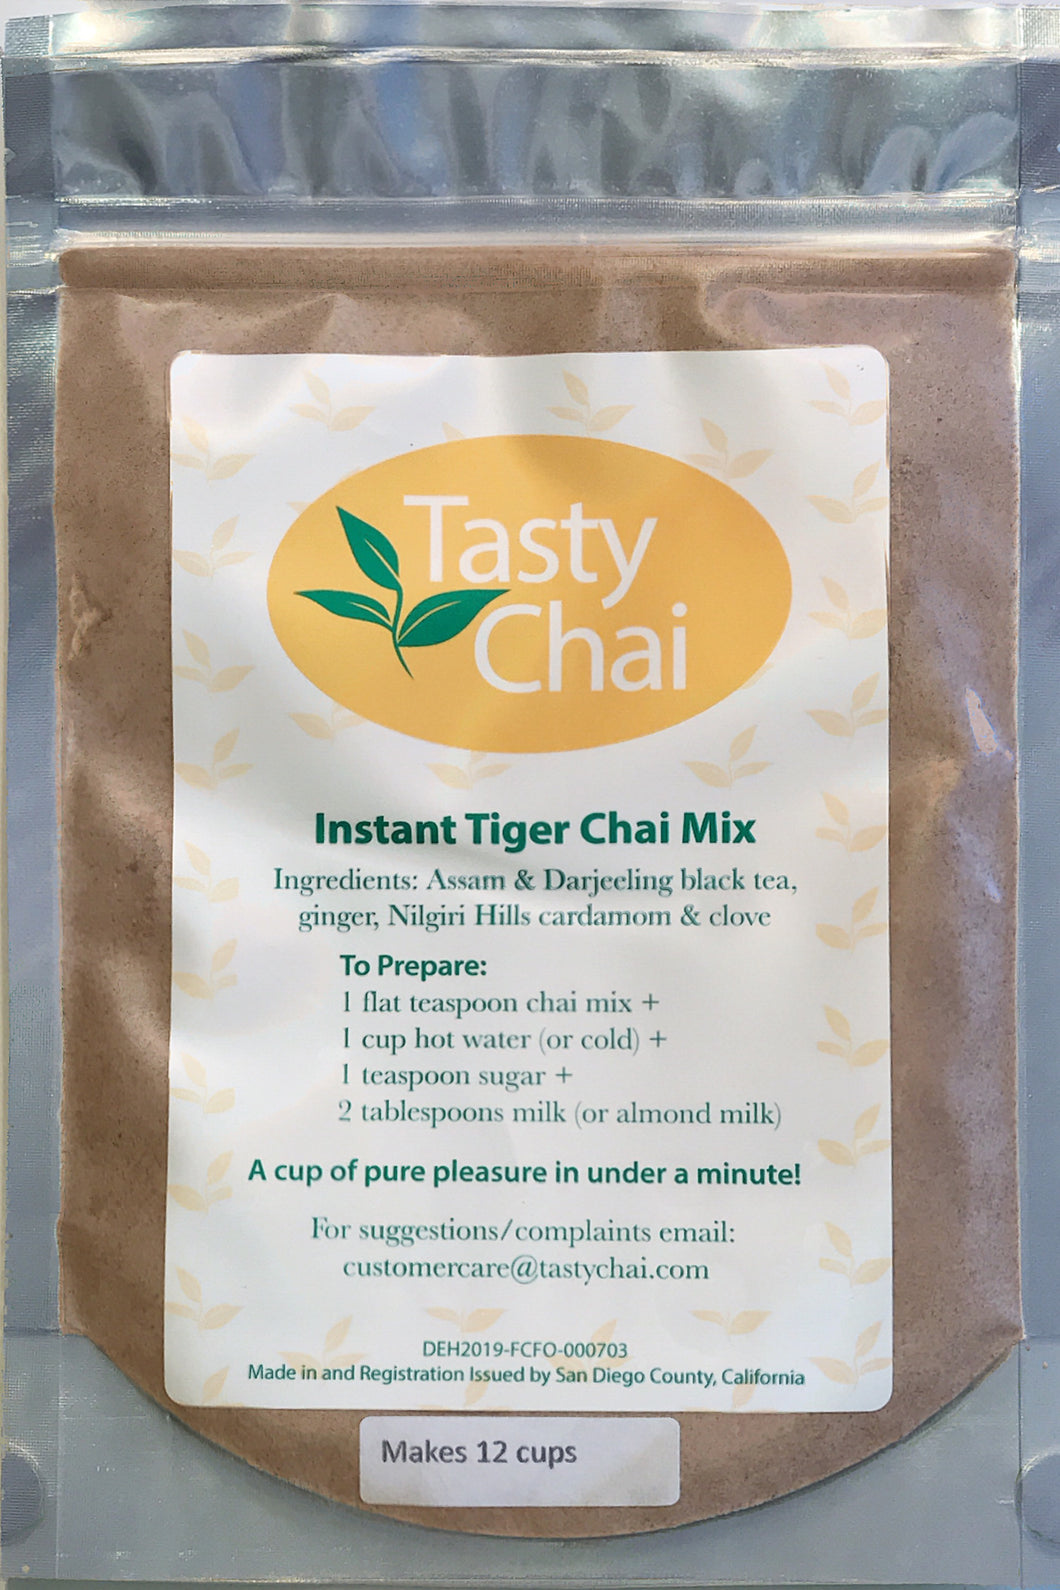 Tasty Chai's Tiger Chai 12 cup pack